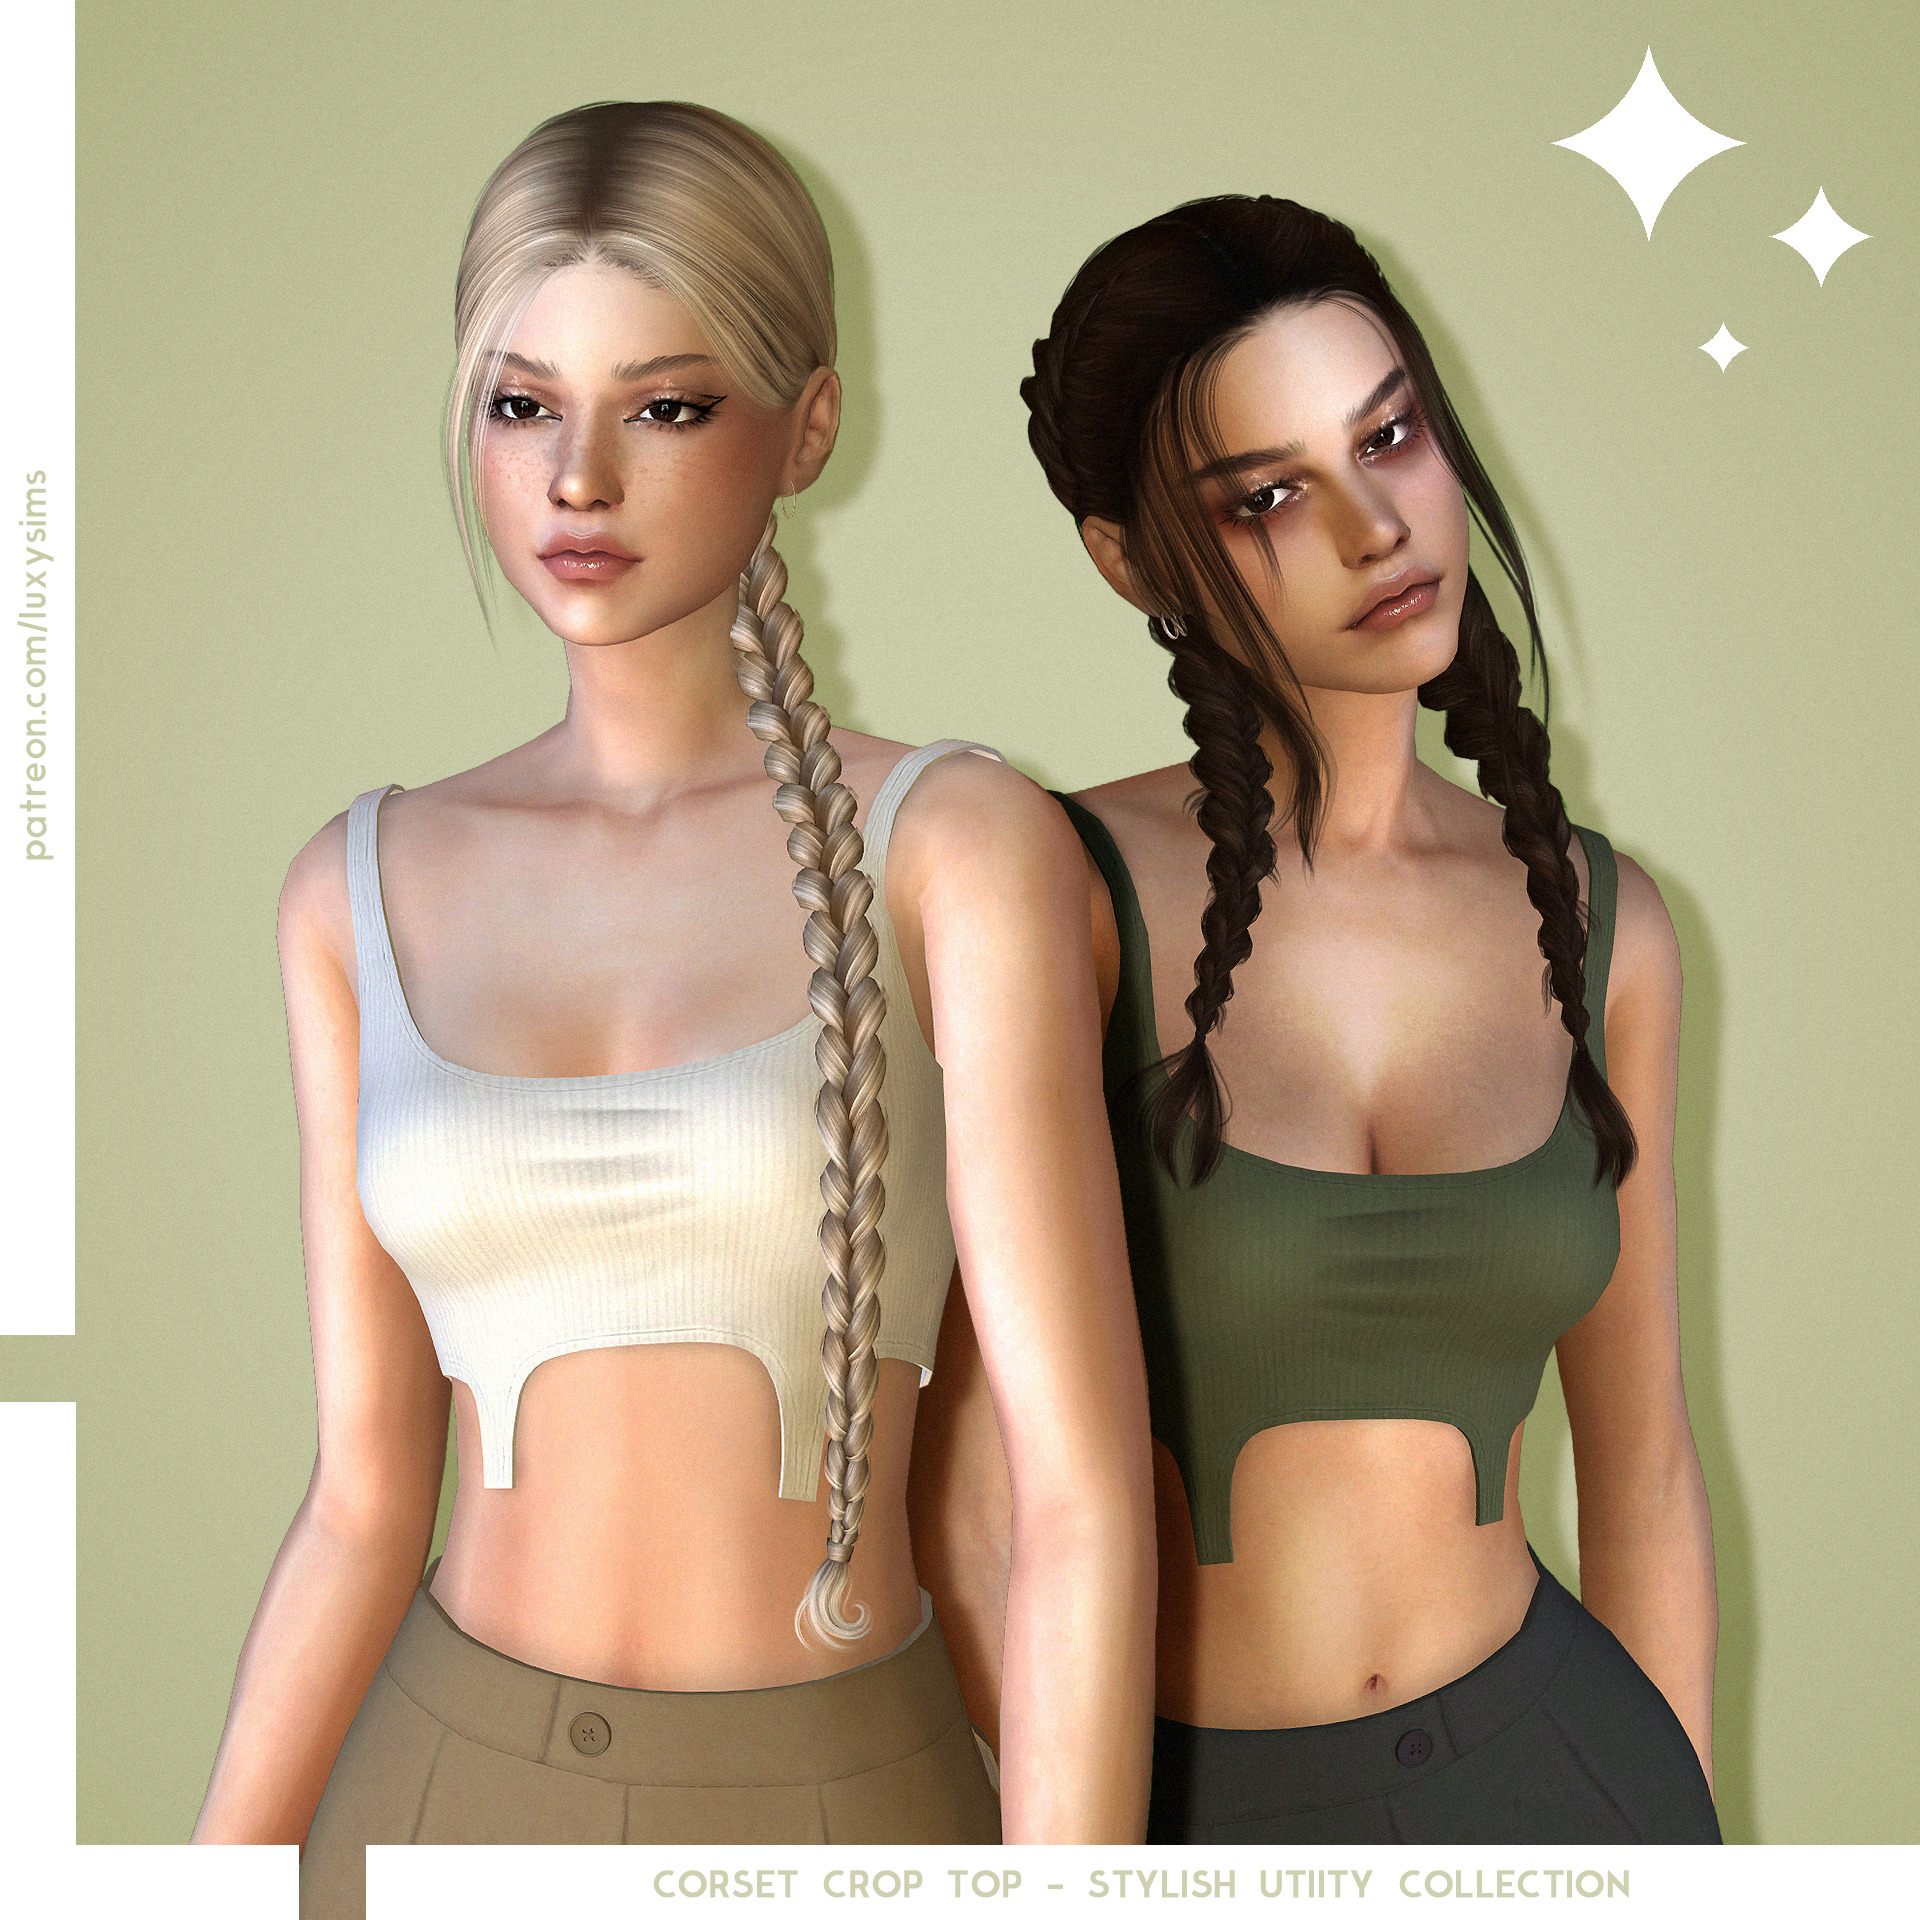 Corset Crop Top - Stylish Utility Collection project avatar